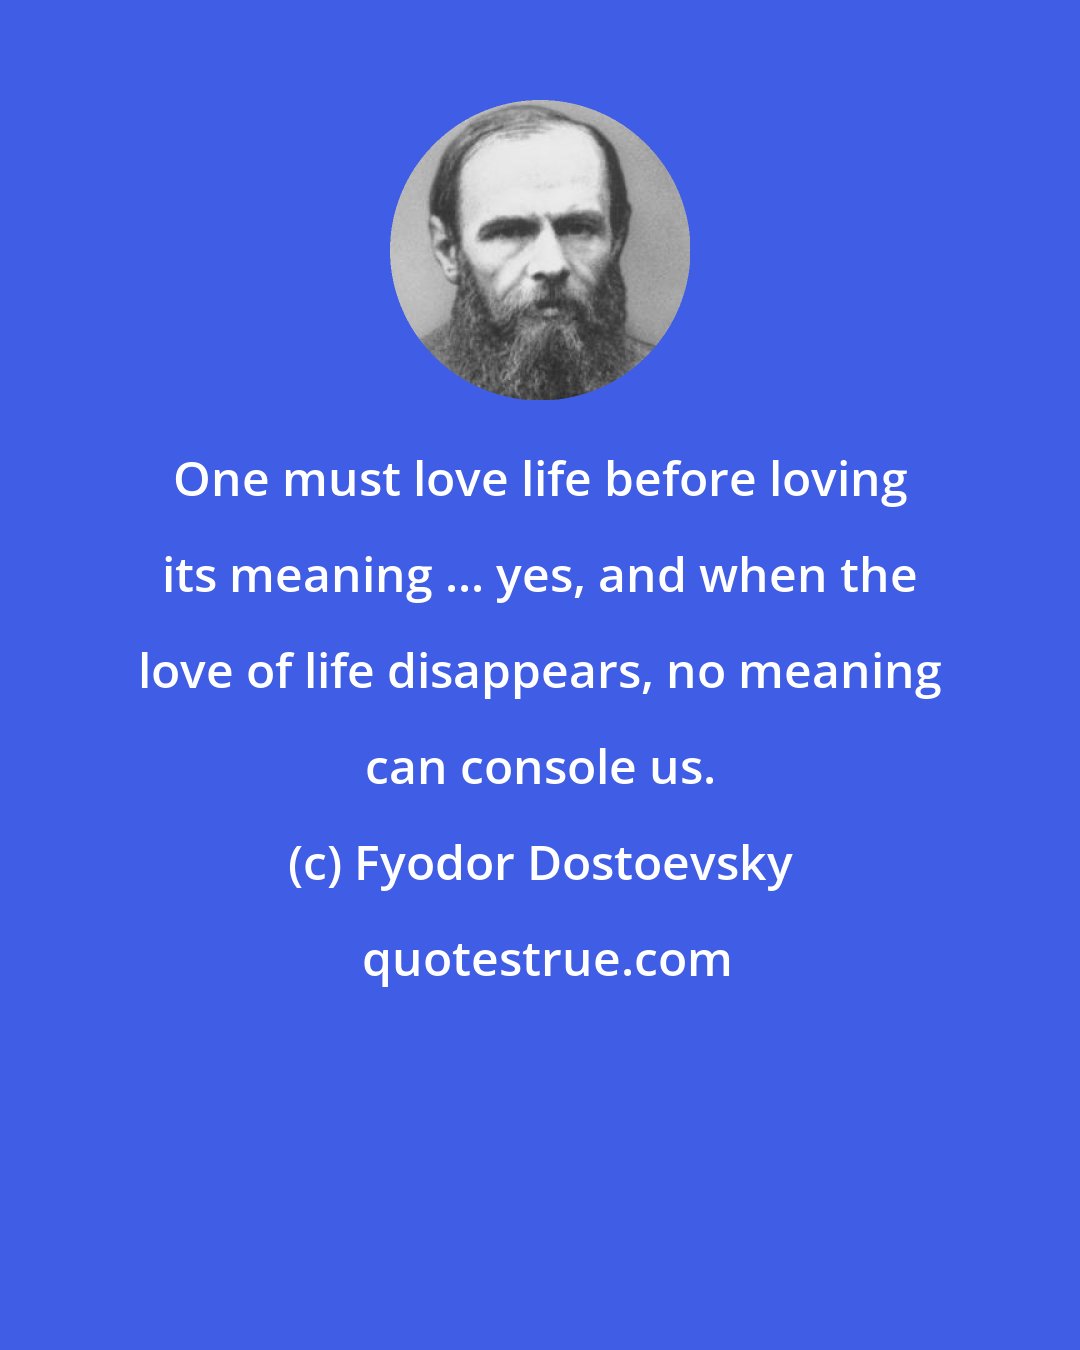 Fyodor Dostoevsky: One must love life before loving its meaning ... yes, and when the love of life disappears, no meaning can console us.